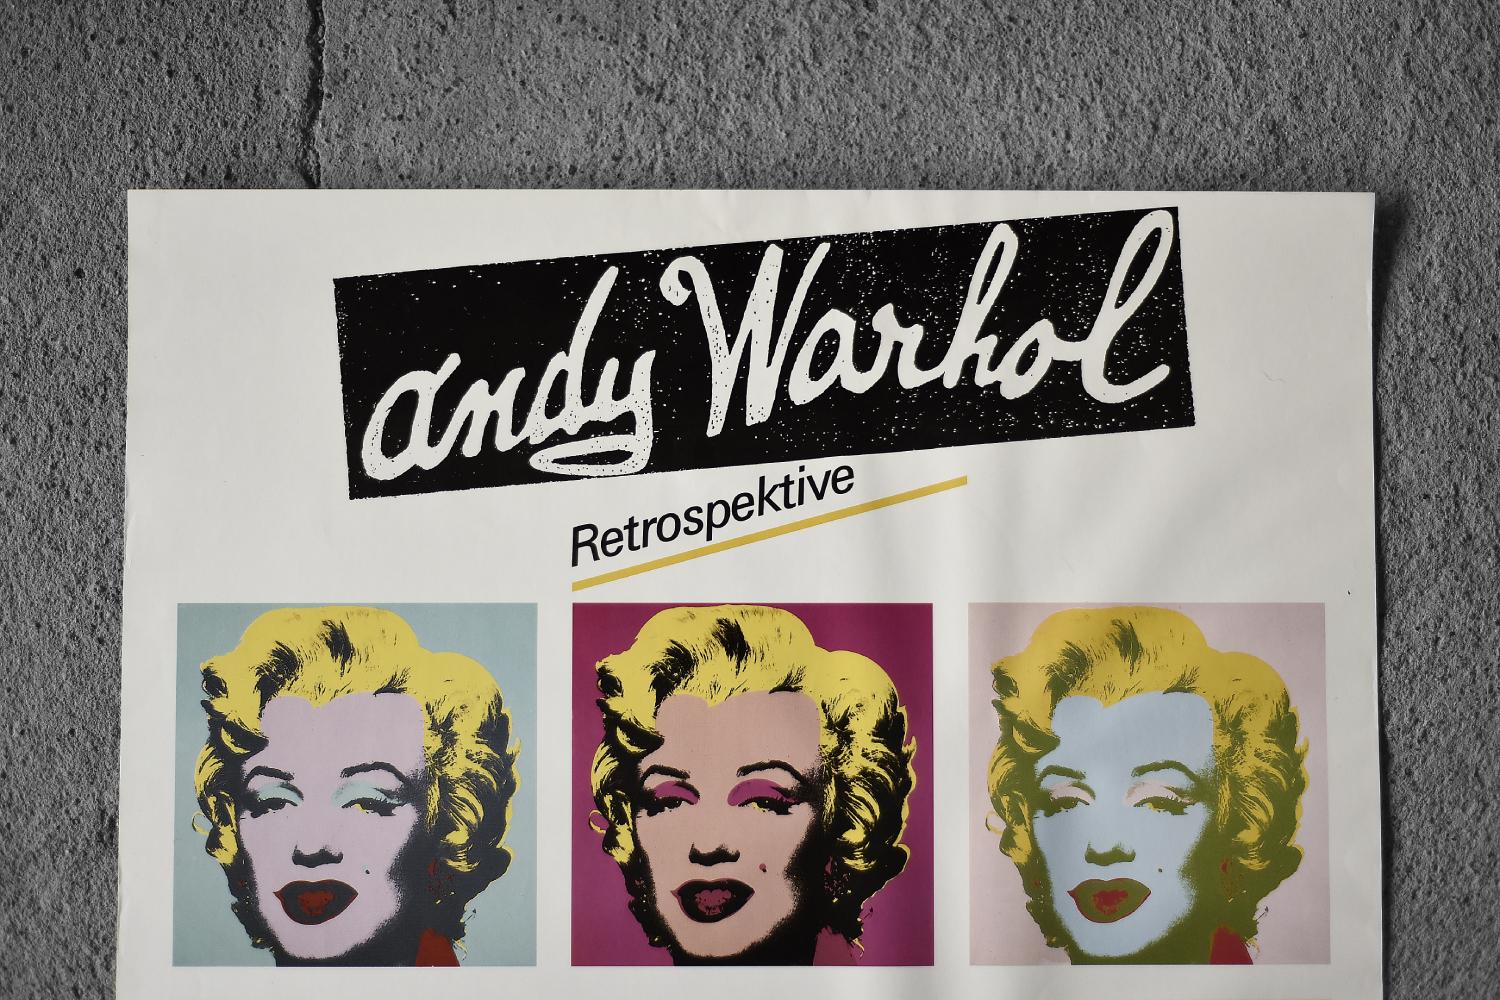 German Original Poster from the Andy Warhol Exhibition, Marilyn Monroe RETROSPECTIVE For Sale